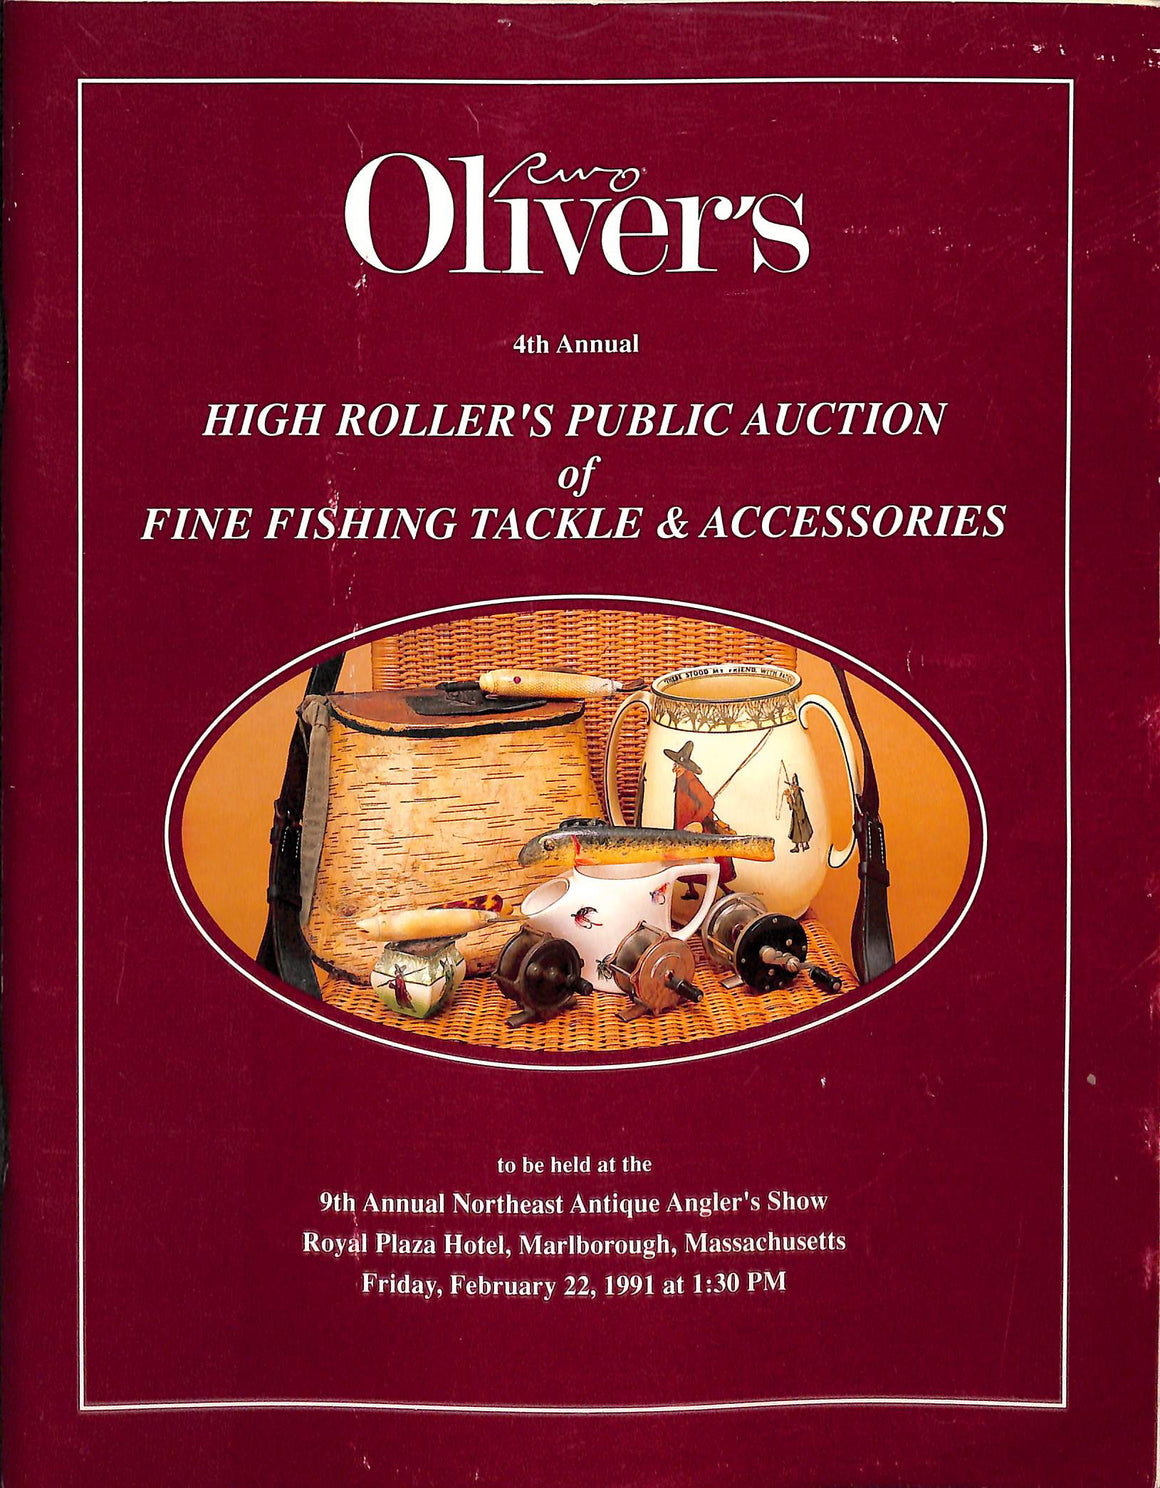 Oliver's 4th Annual High Roller's Public Auction Of Fine Fishing Tackle & Accessories